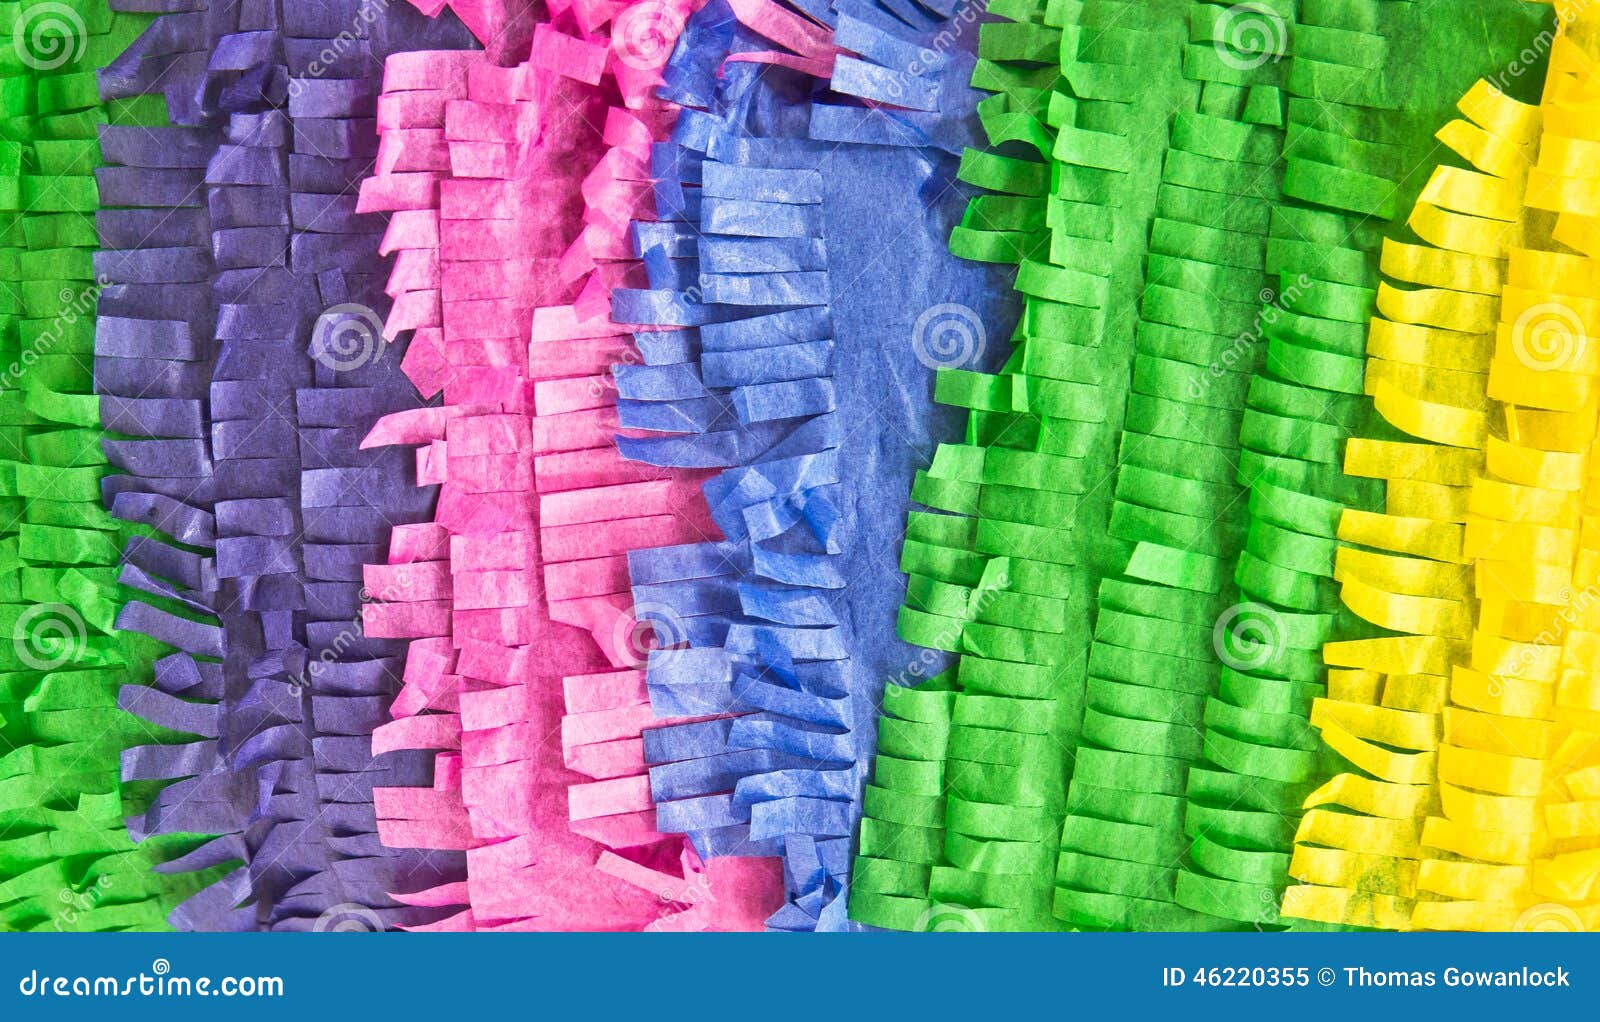 Tissue paper stock image. Image of background, yellow - 46220355